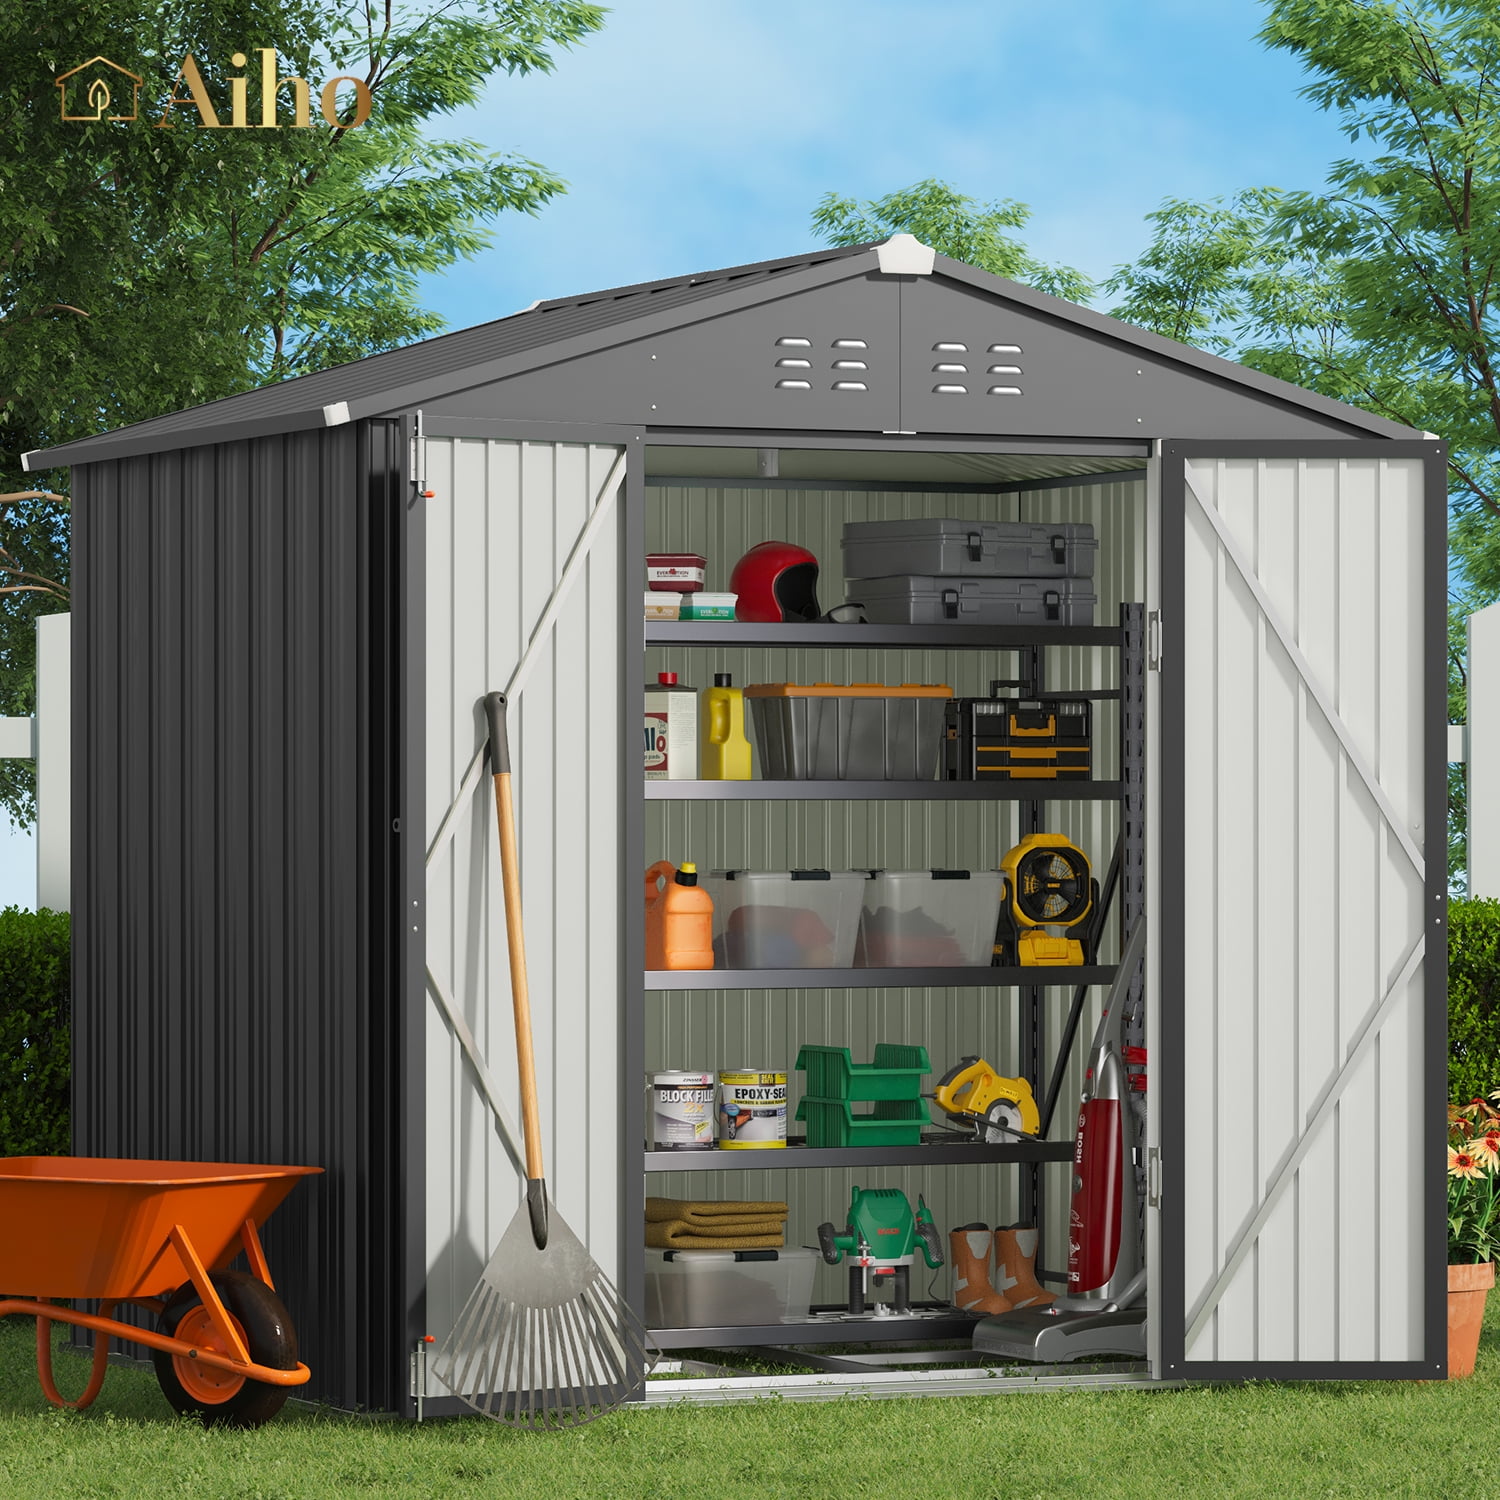 Aiho 8' x 6' Shed on Clearance, Outdoor Storage Shed with Metal Base Frame  & Air Vent & Lockable Doors for Garden and Backyard - Light Brown